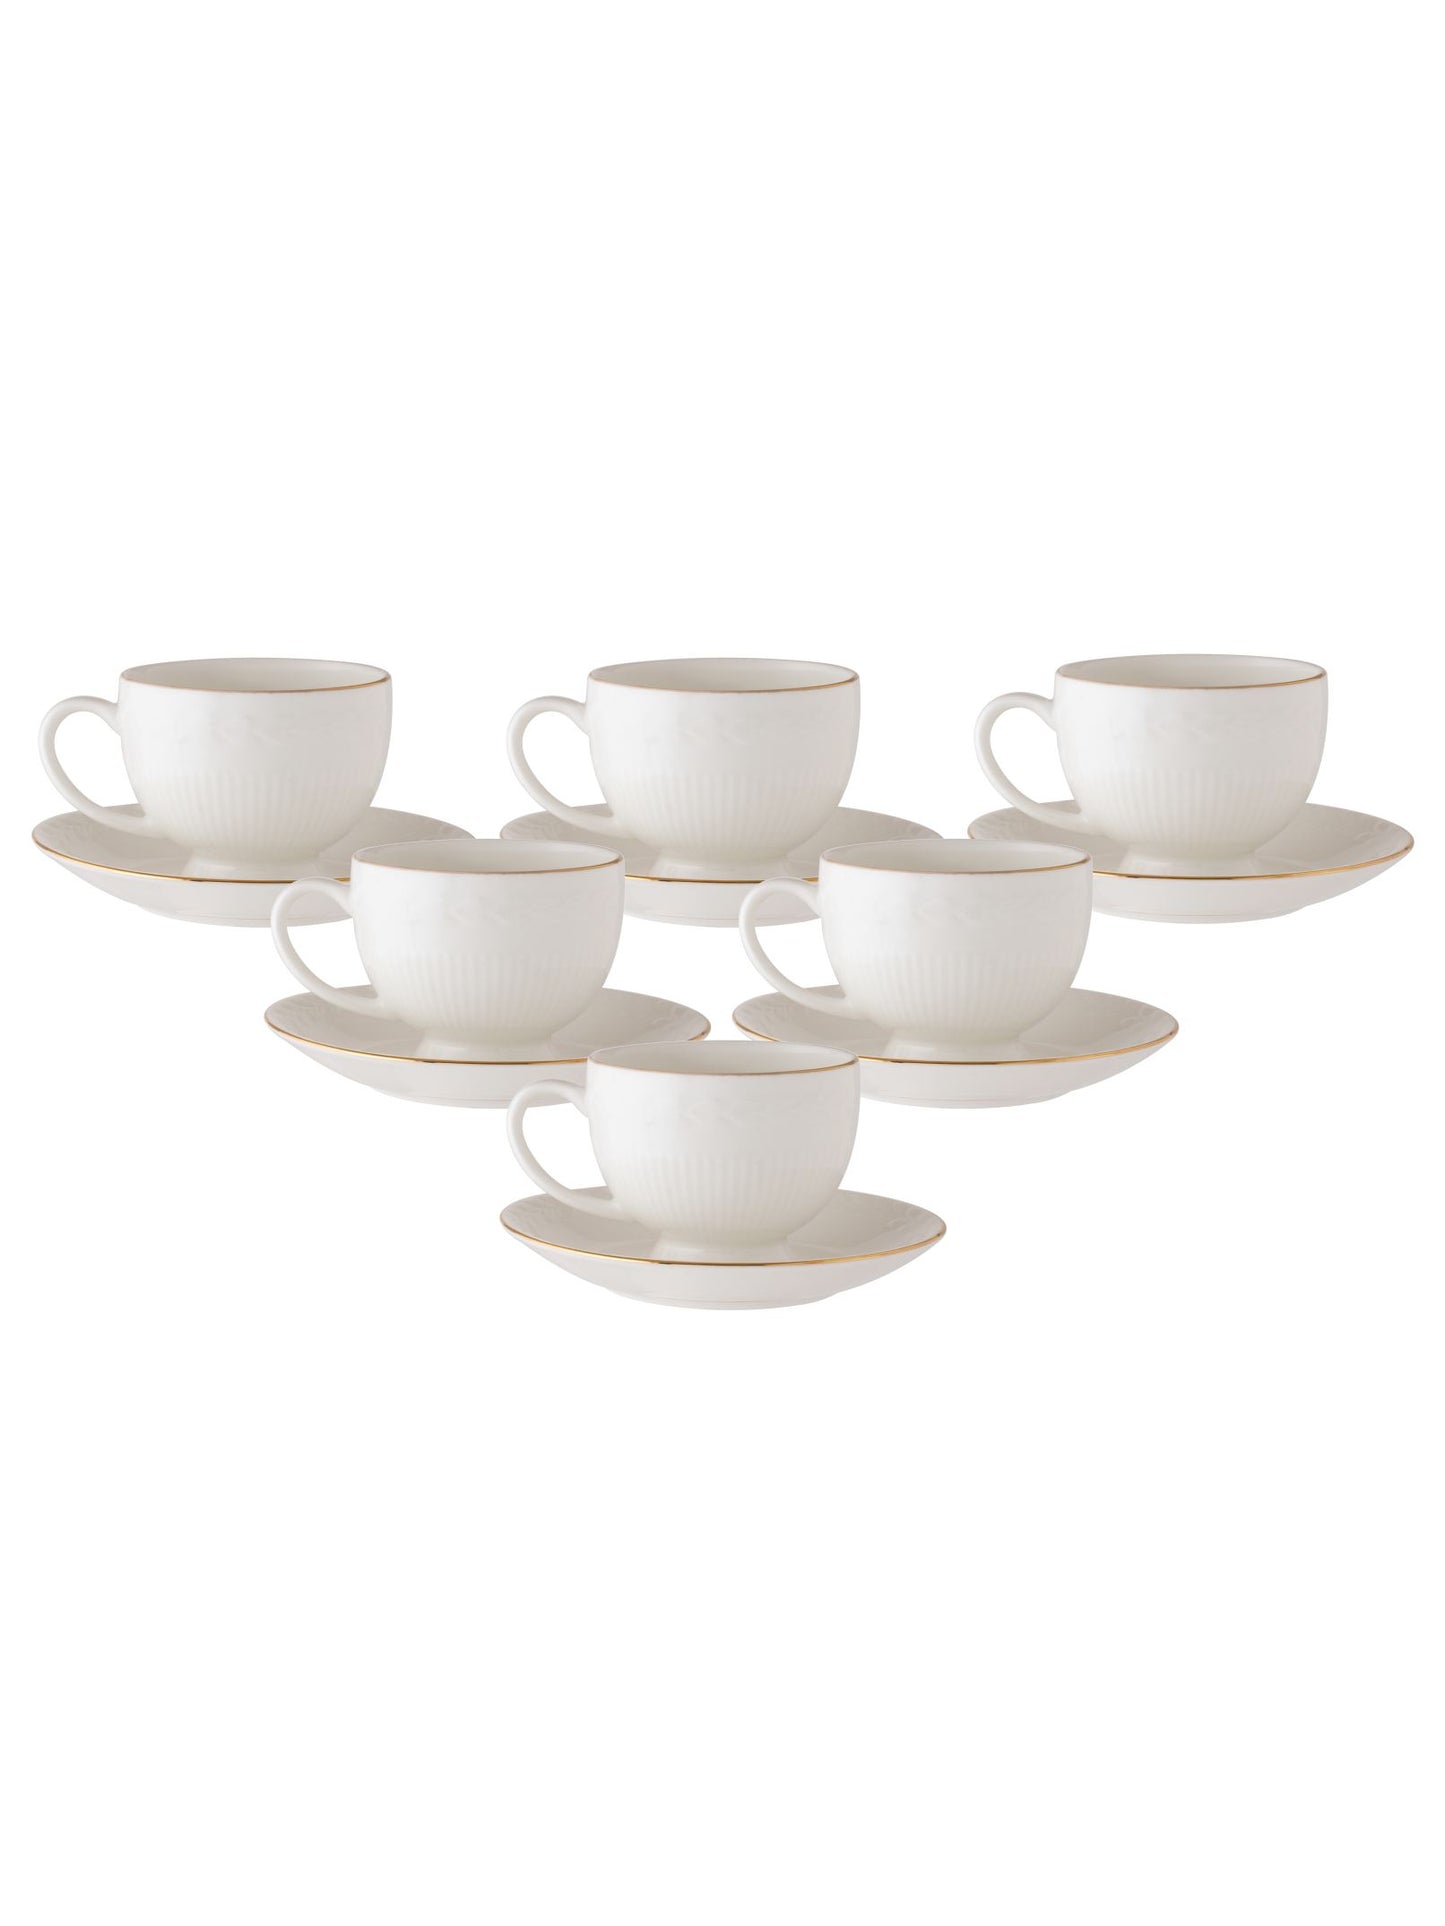 Snow Impression Cup & Saucer, 170ml, Set of 12 (6 Cups + 6 Saucers) (1101)